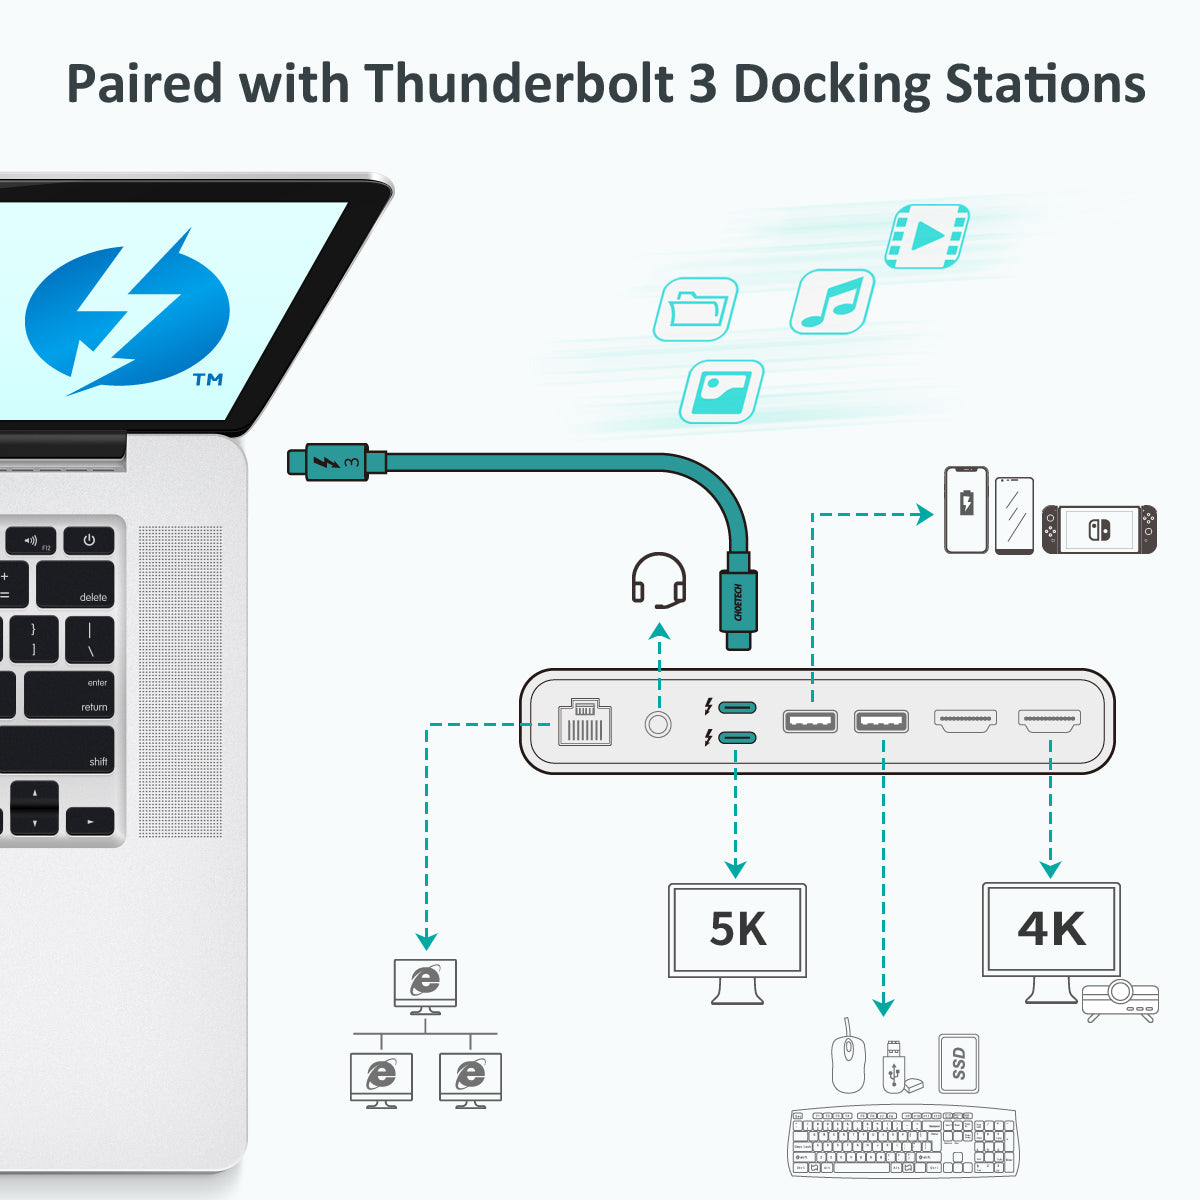 A3009 CHOETECH Câble USB Type C Thunderbolt 3 (0,8 m/2,6 pieds) Prend en Charge PD 100W Charge 40Gbps 5K UHD Display Compatible avec MacBook Pro 2020/2019/2018, MacBook Air 2020-2018, Dell XPS, LG 5K Ultrafine Display